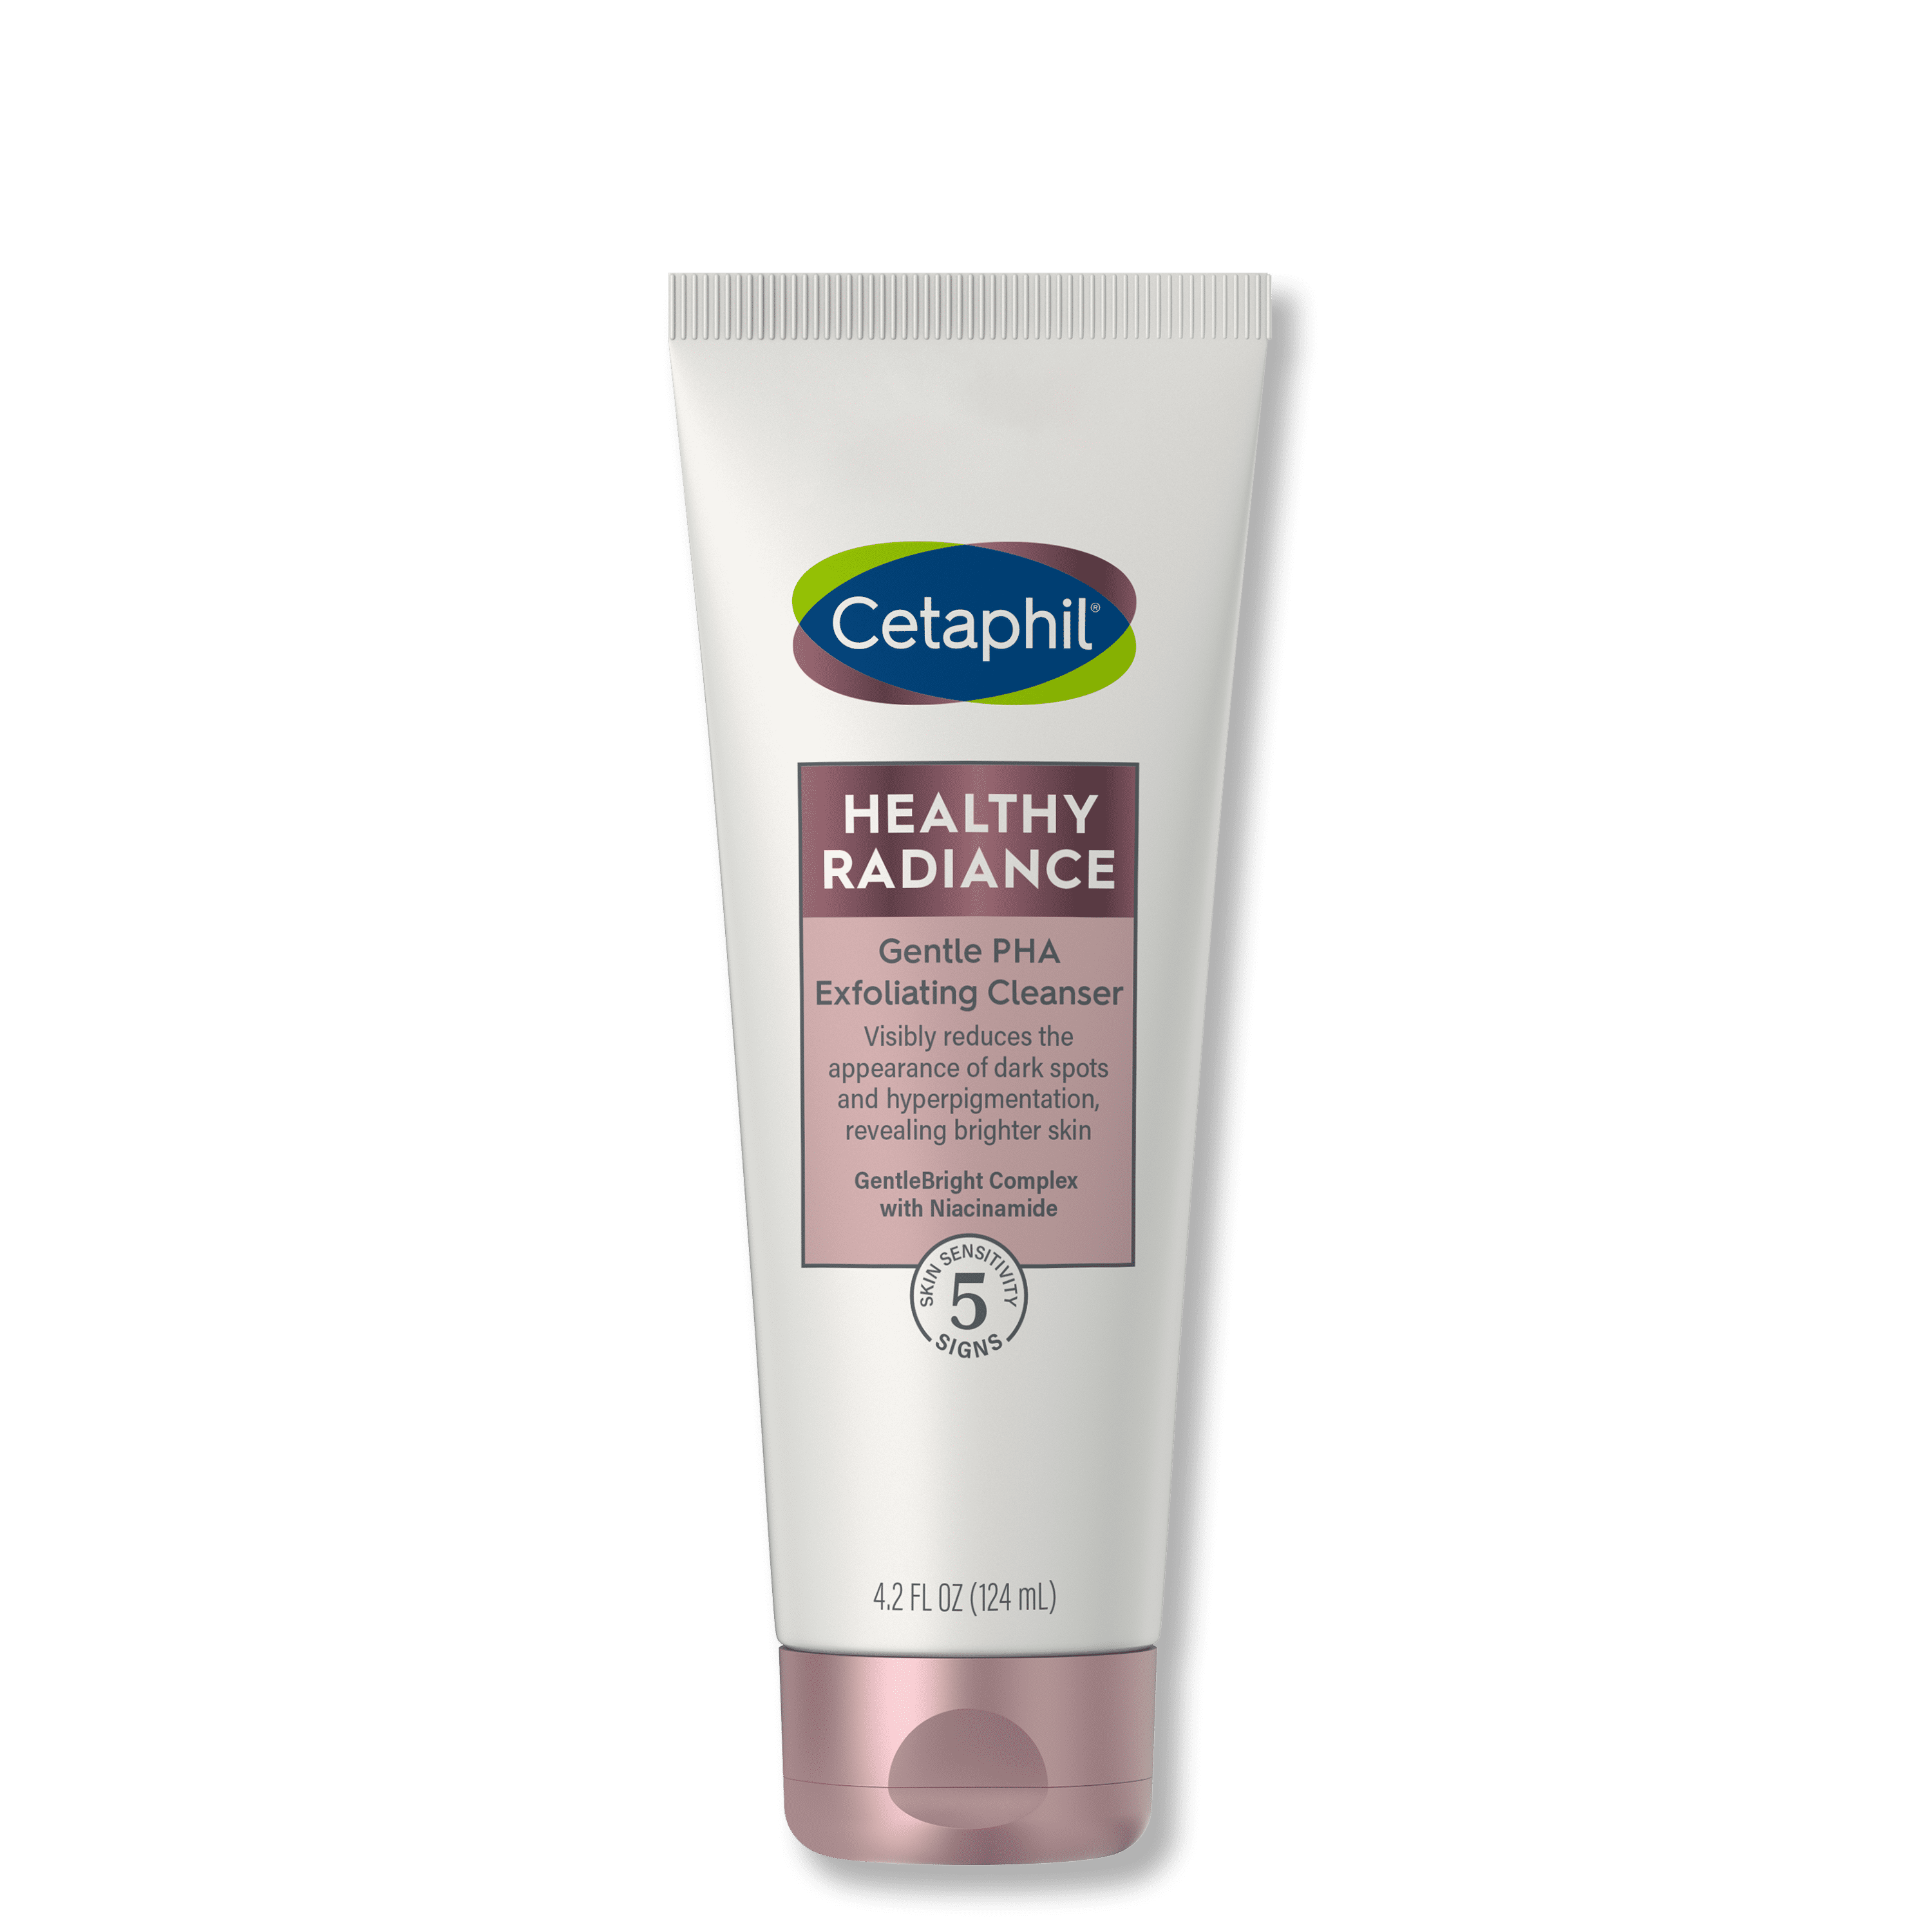 Face Wash by Cetaphil, Healthy Radiance Gentle Exfoliating Cleanser, Brightens and Visibly Reduces Dark Spots and Hyperpigmentation, Designed for Sensitive Skin, Hypoallergenic, Fragrance Free, 4.2oz